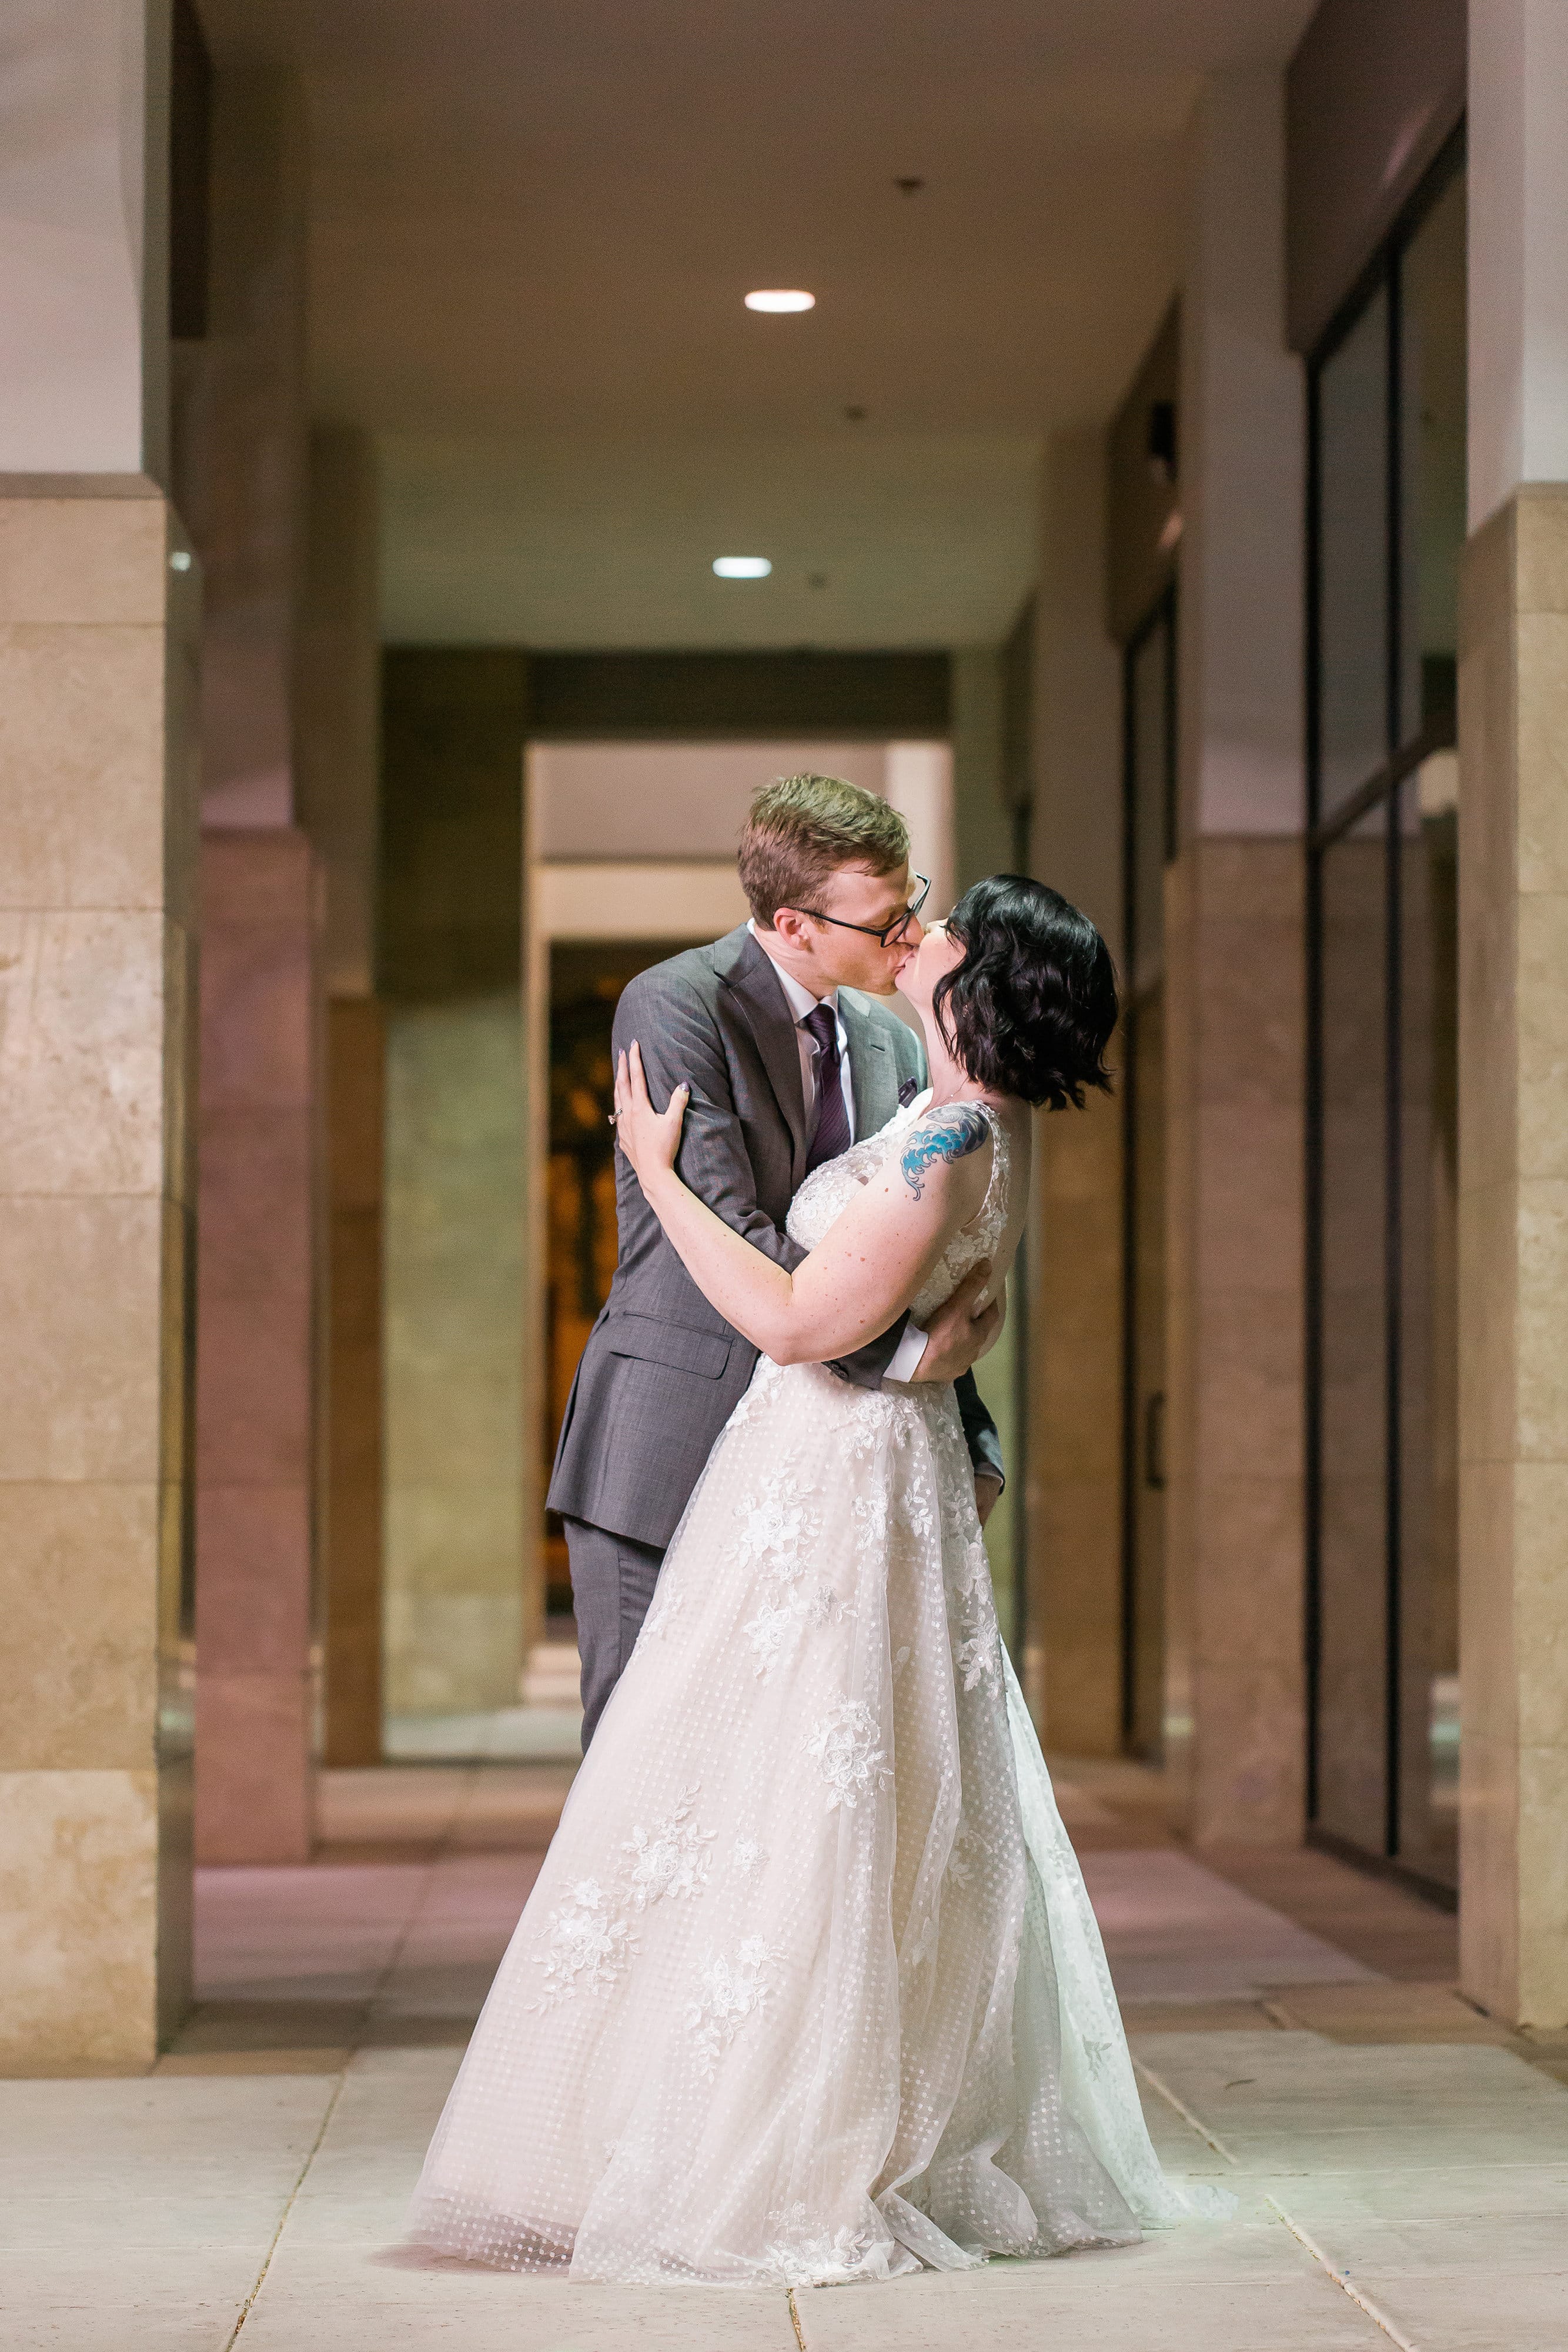 Travel-Themed Wedding with Swiss Dot Lace Gown Meryl by Maggie Sottero.